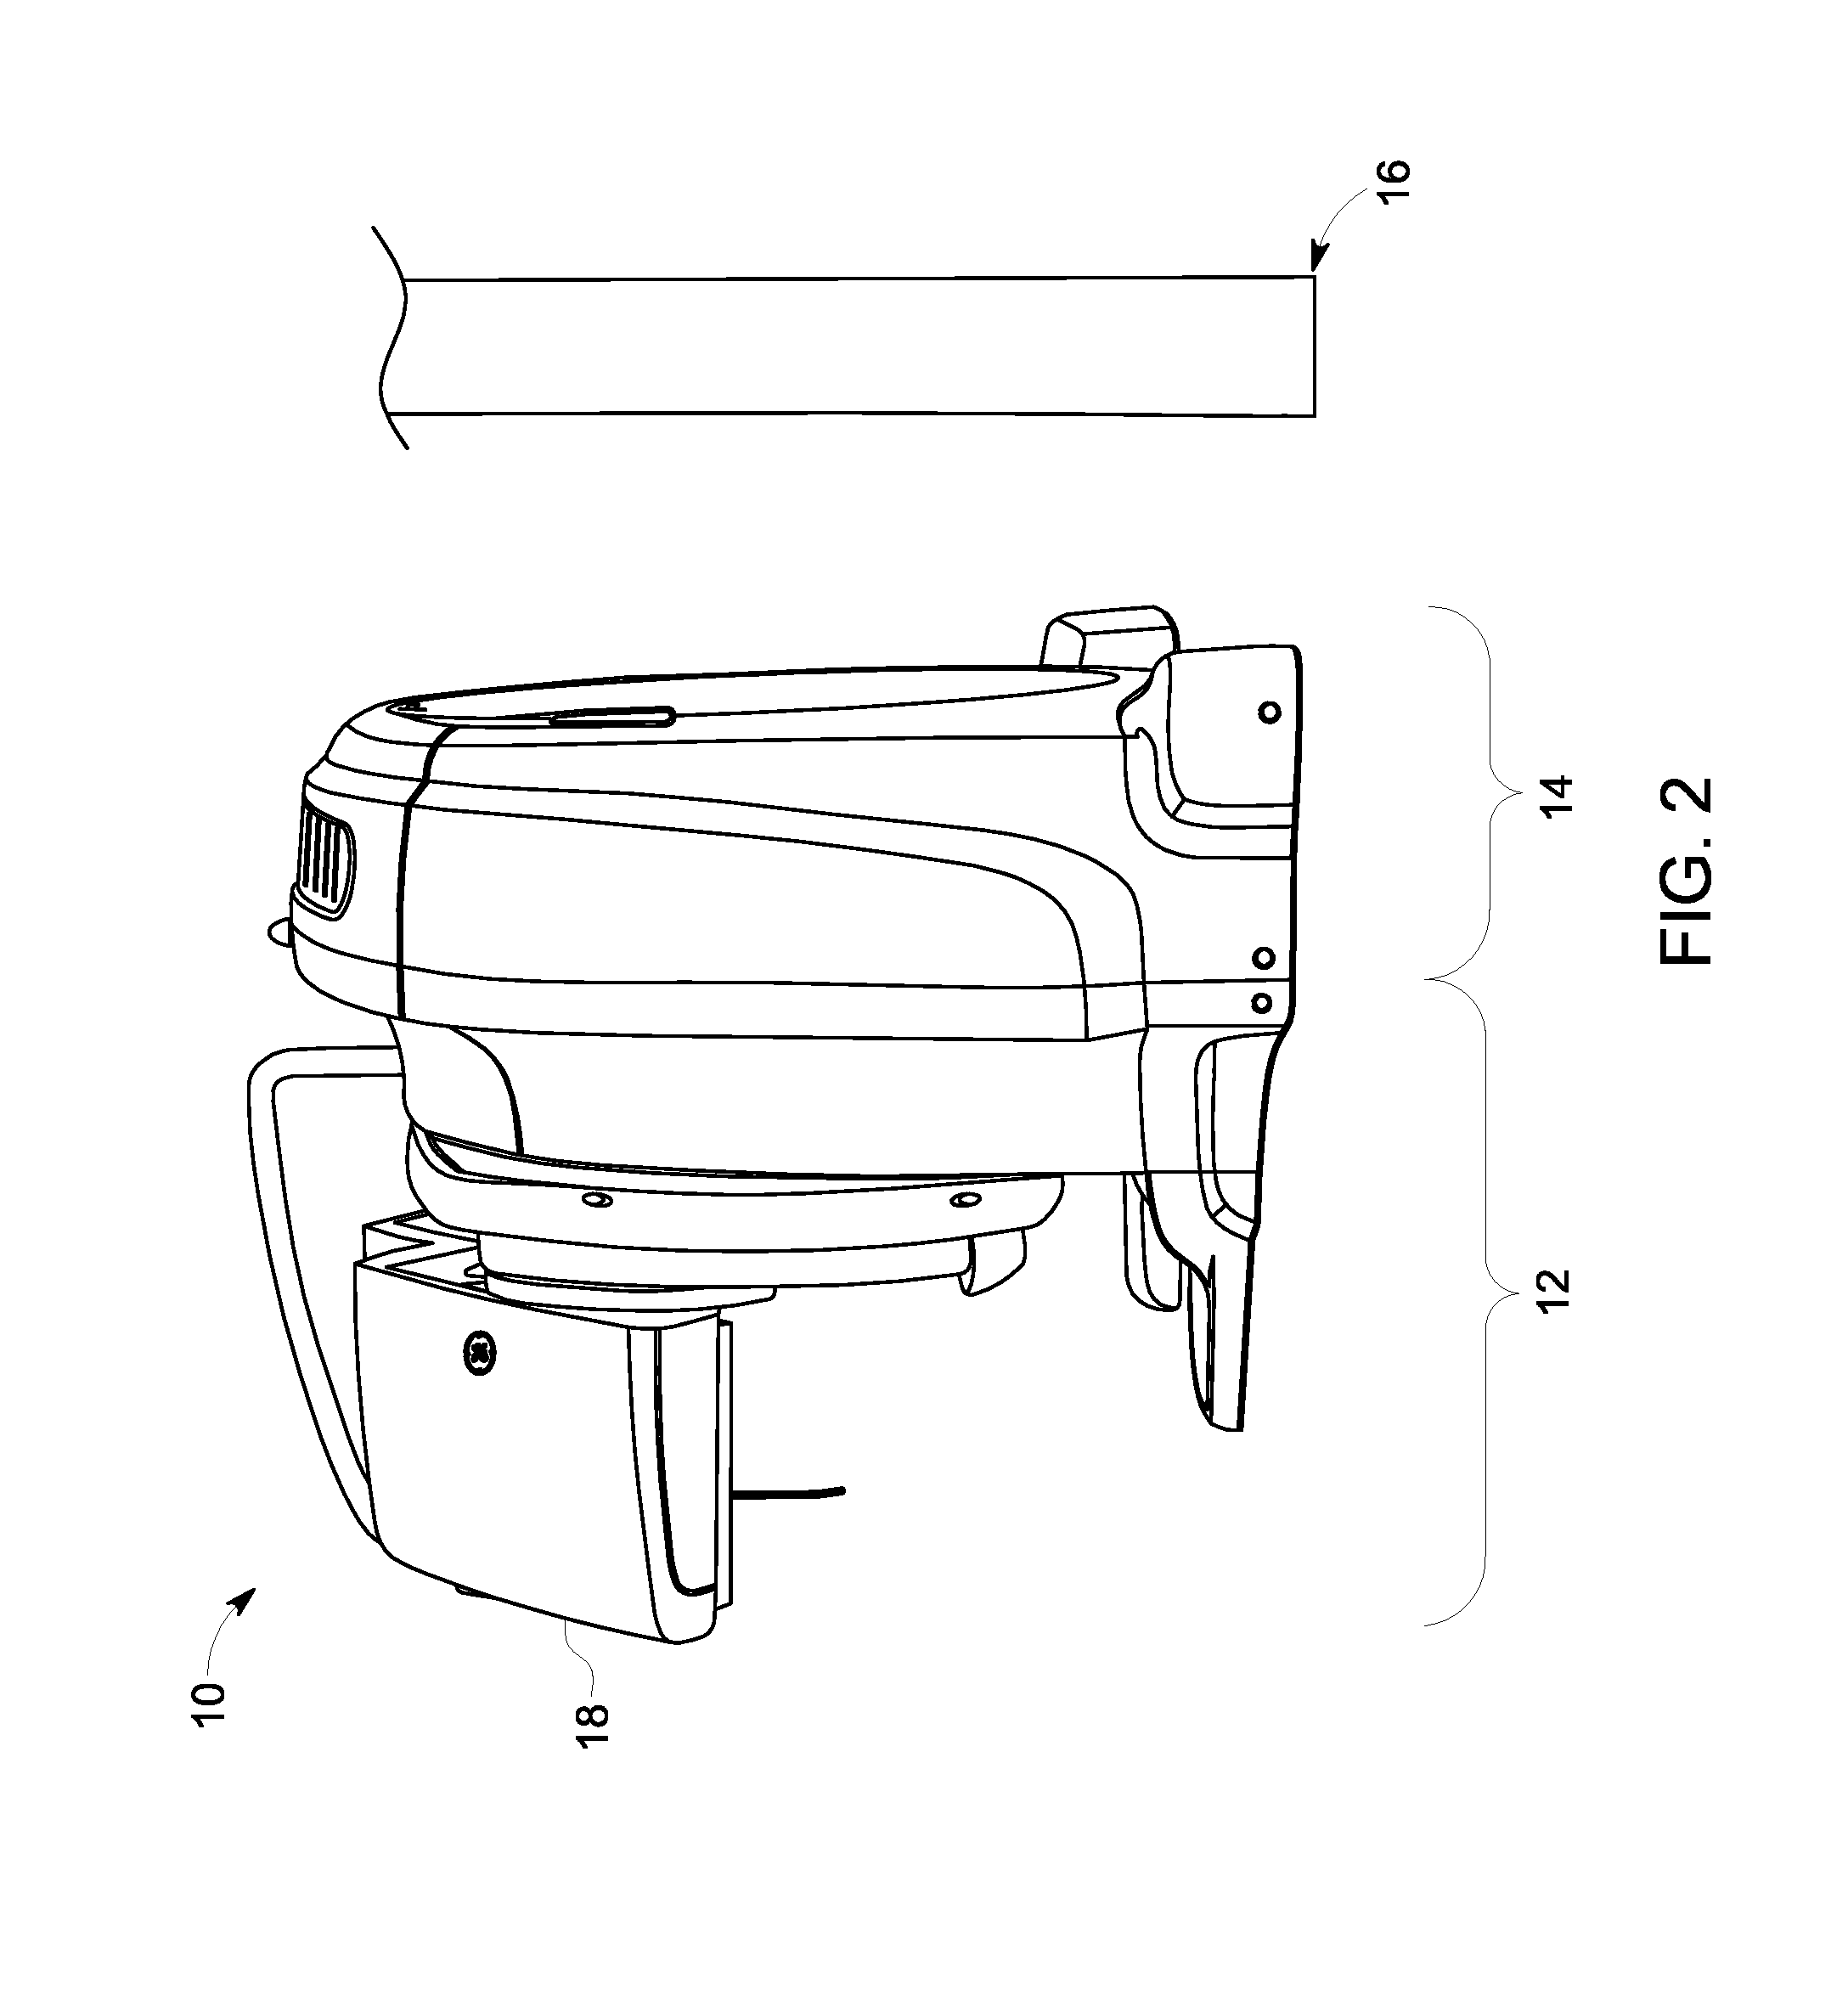 Ct system for use in multi-modality imaging system